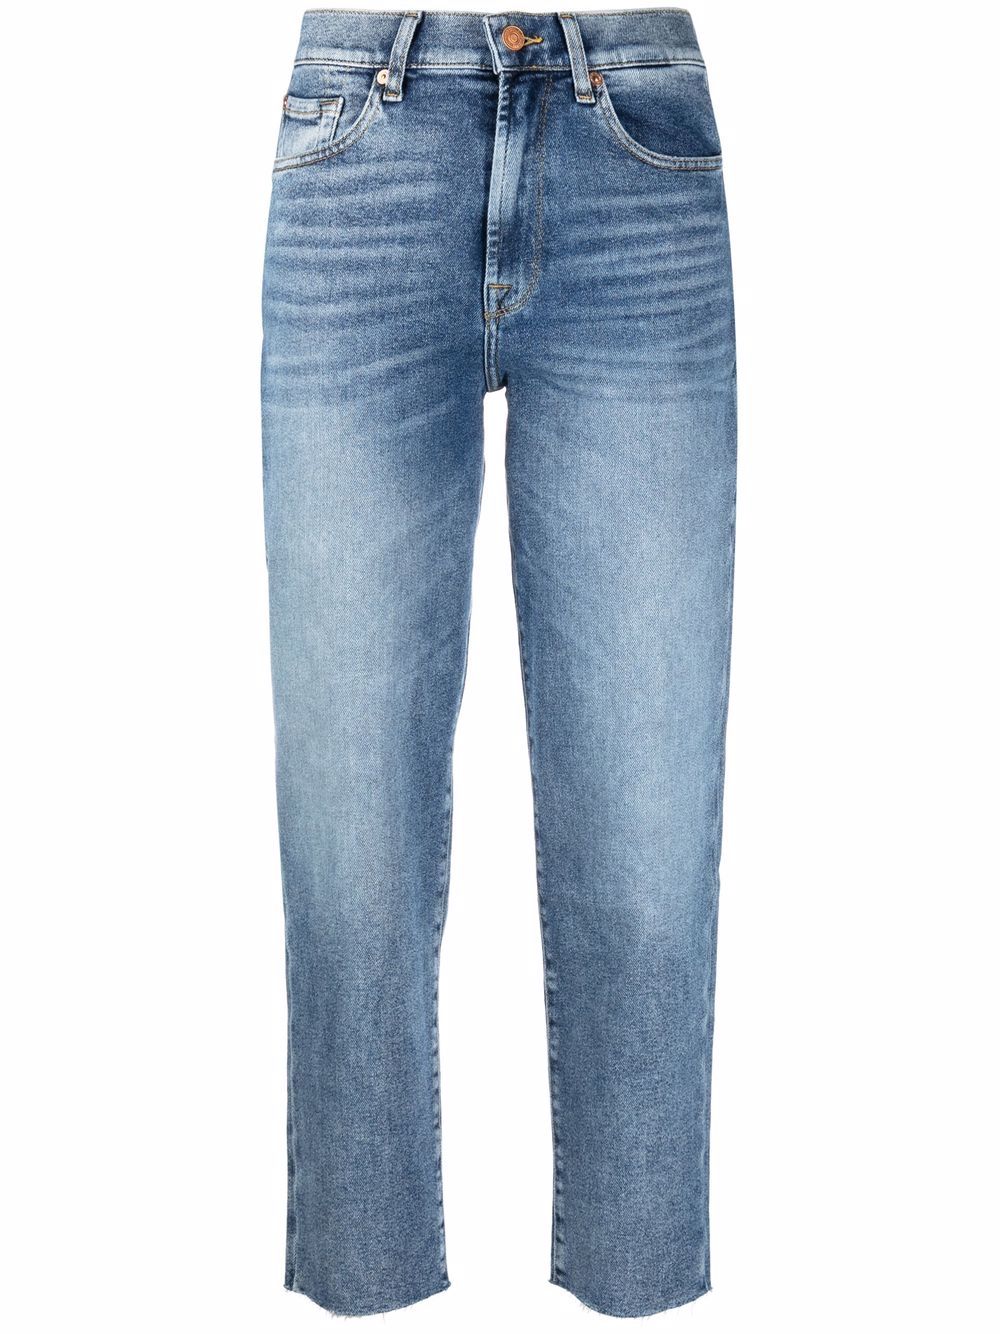 7 For All Mankind Malia high-waisted straight leg jeans - Blue von 7 For All Mankind